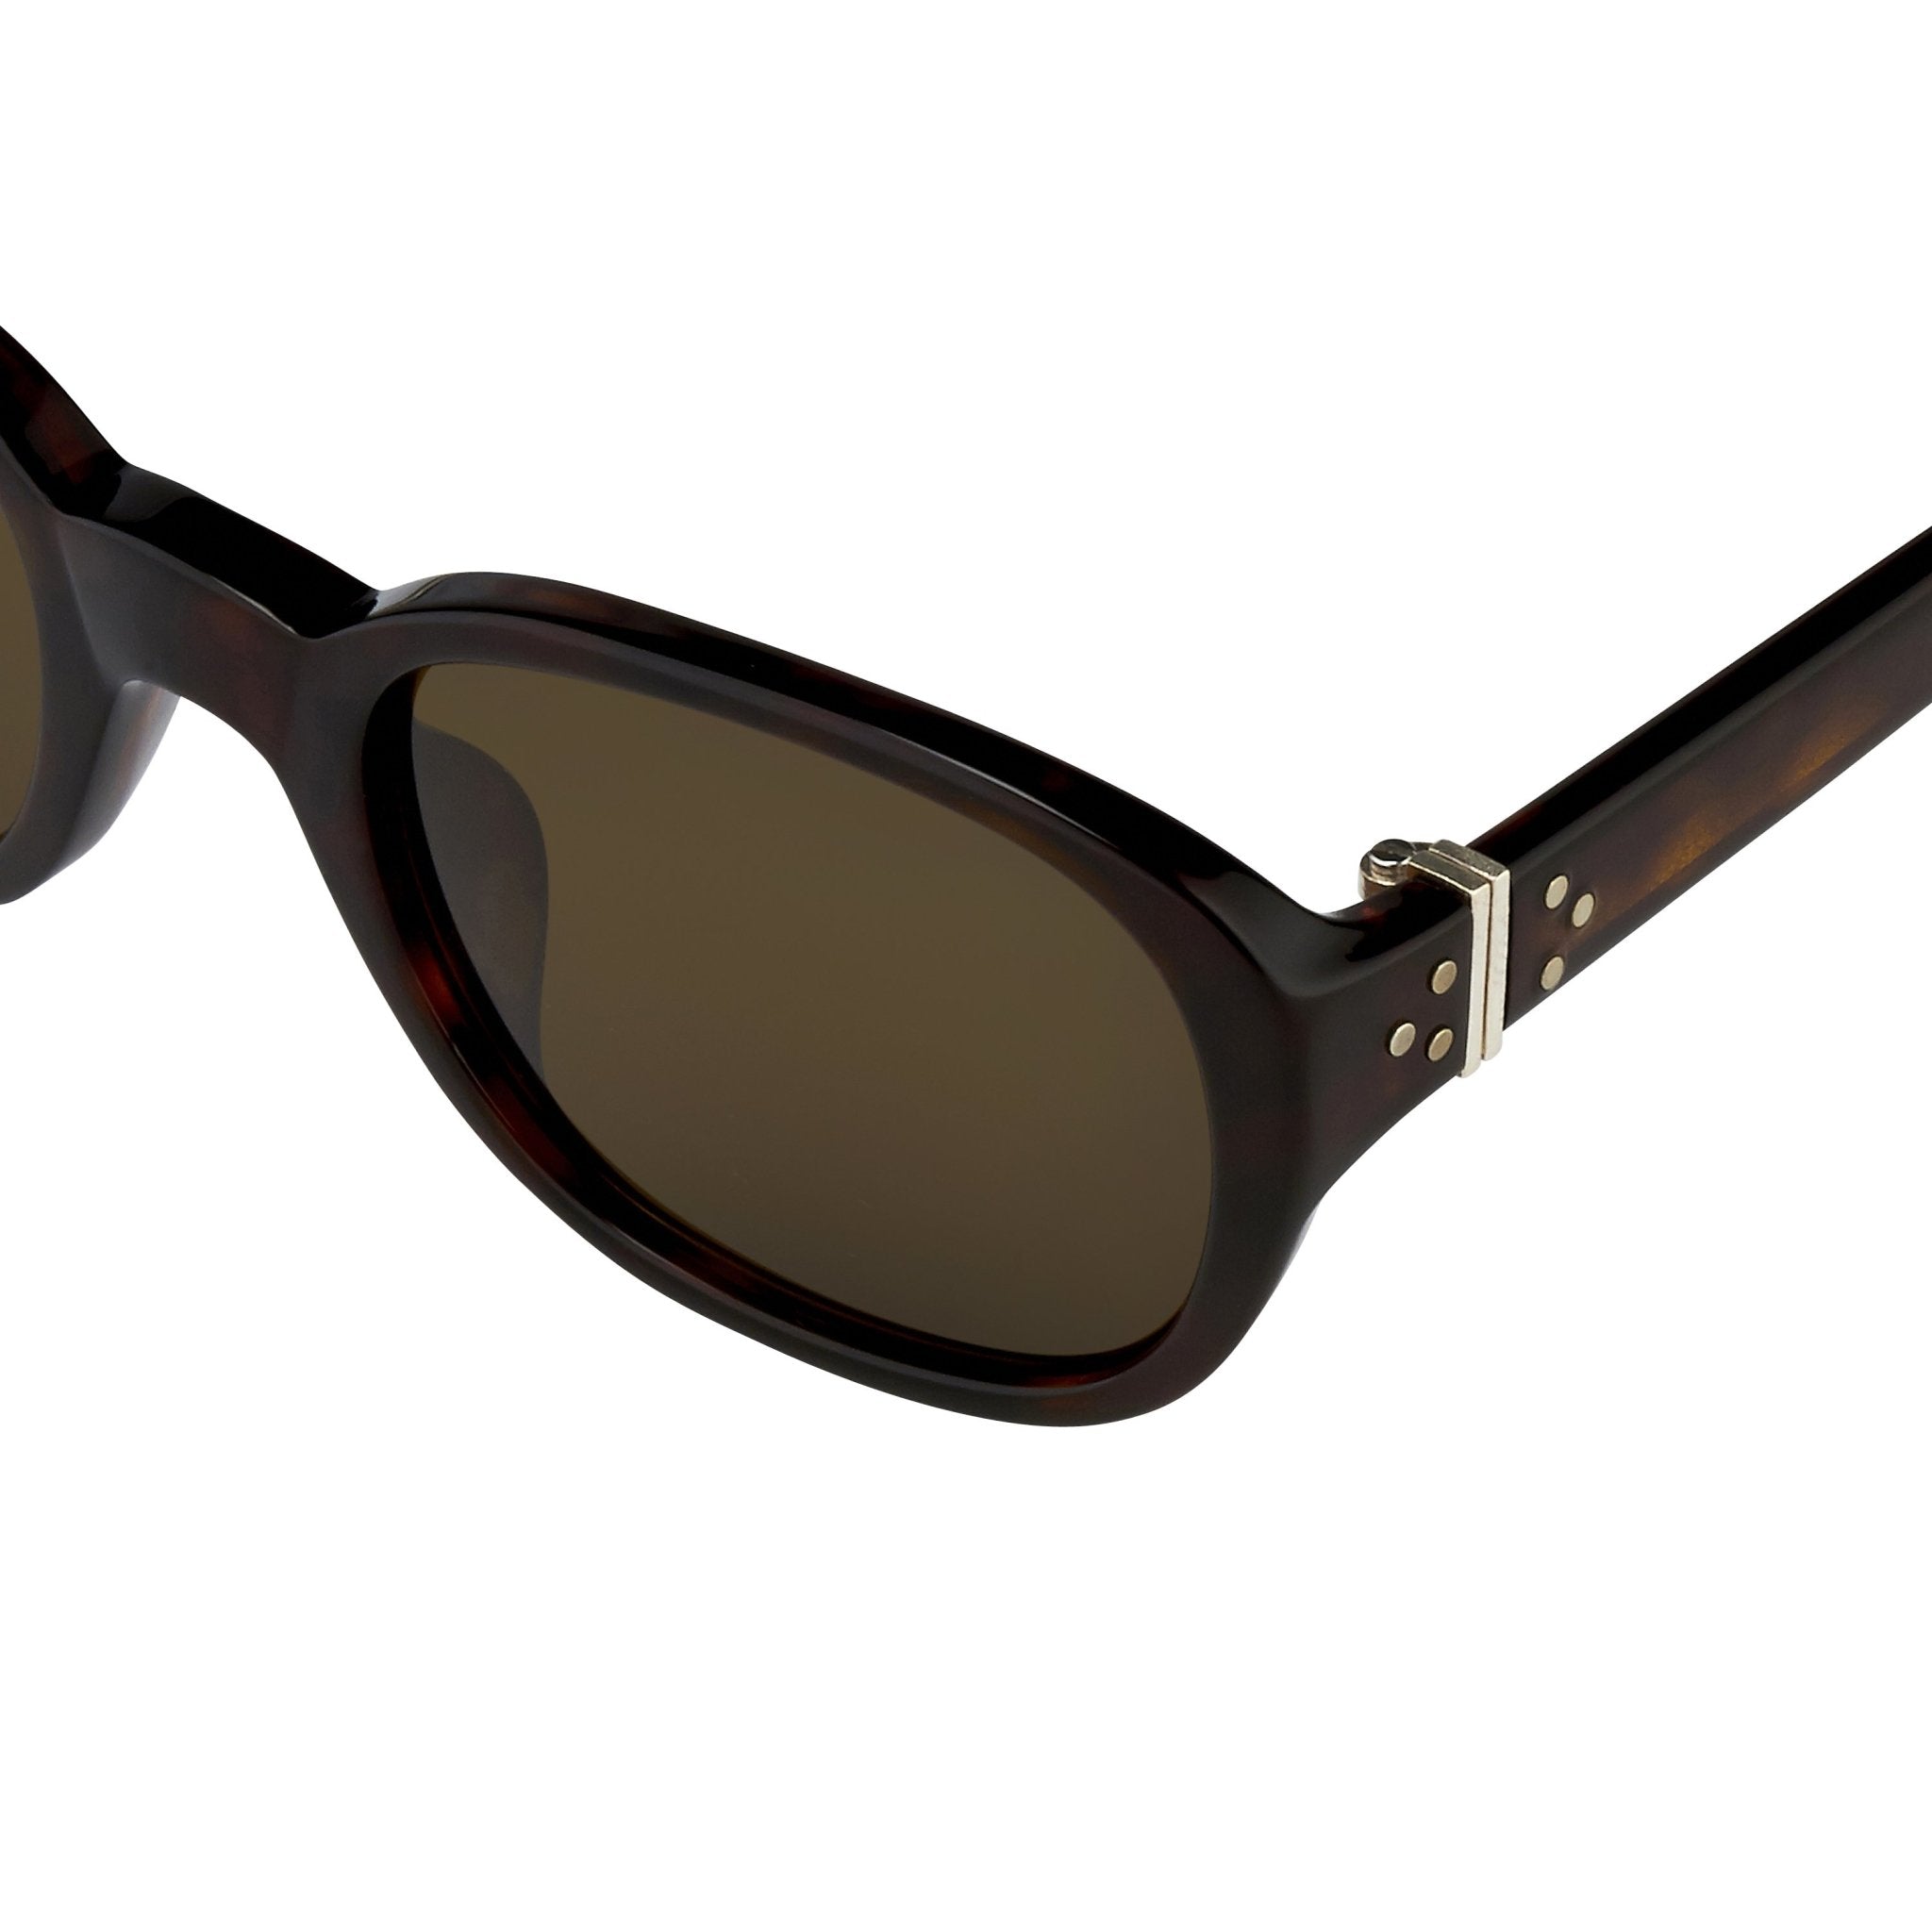 Ann Demeulemeester Sunglasses Oval Tortoise Shell 925 Silver with Brown Lenses Category 3 AD8C4SUN - Watches & Crystals